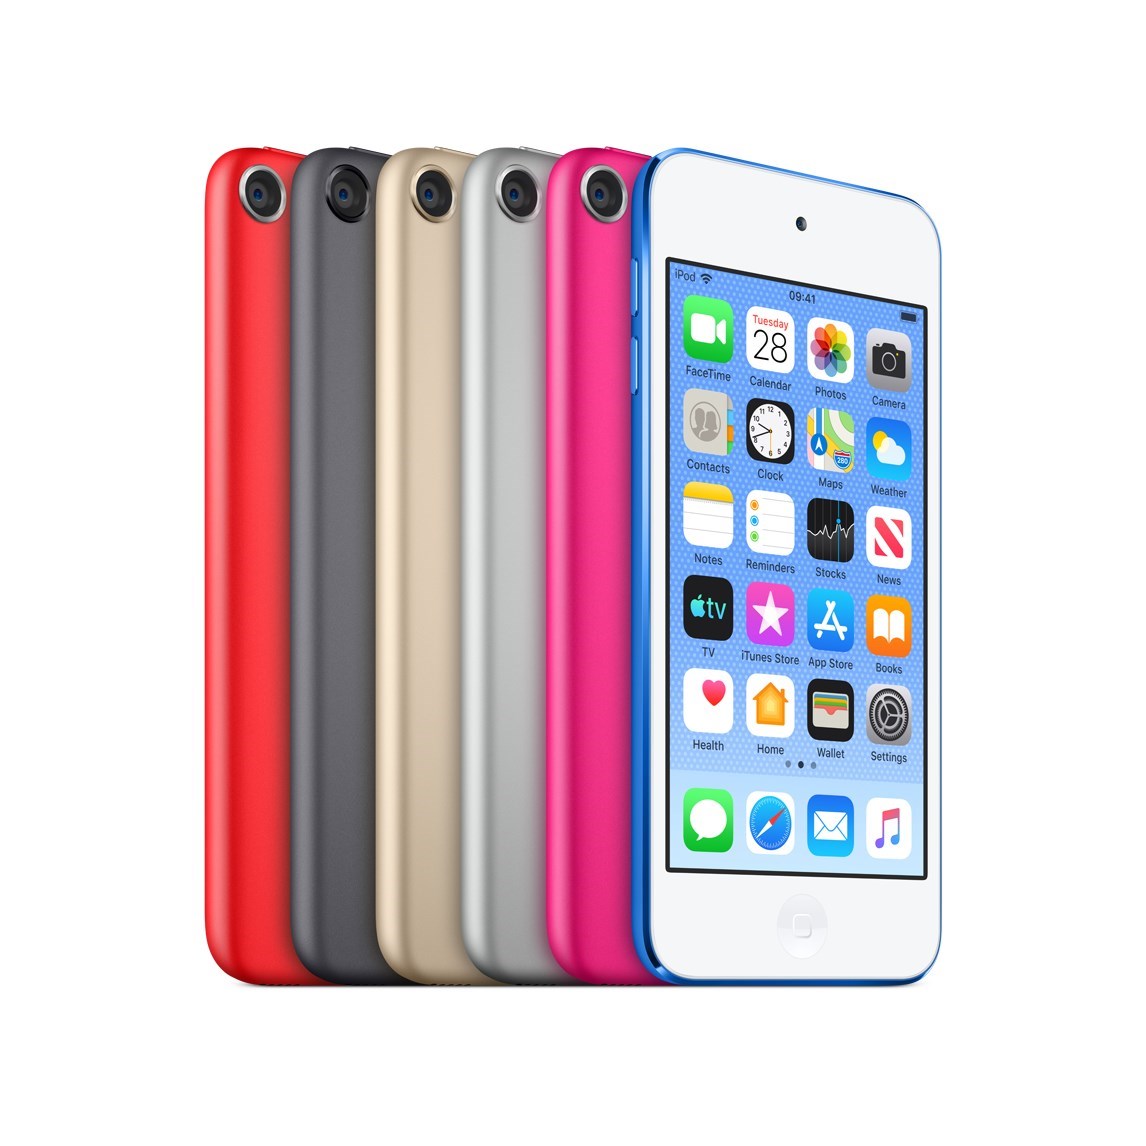 iPod touch 6th Gen – Tech Specs, Features, Release Date, and Price